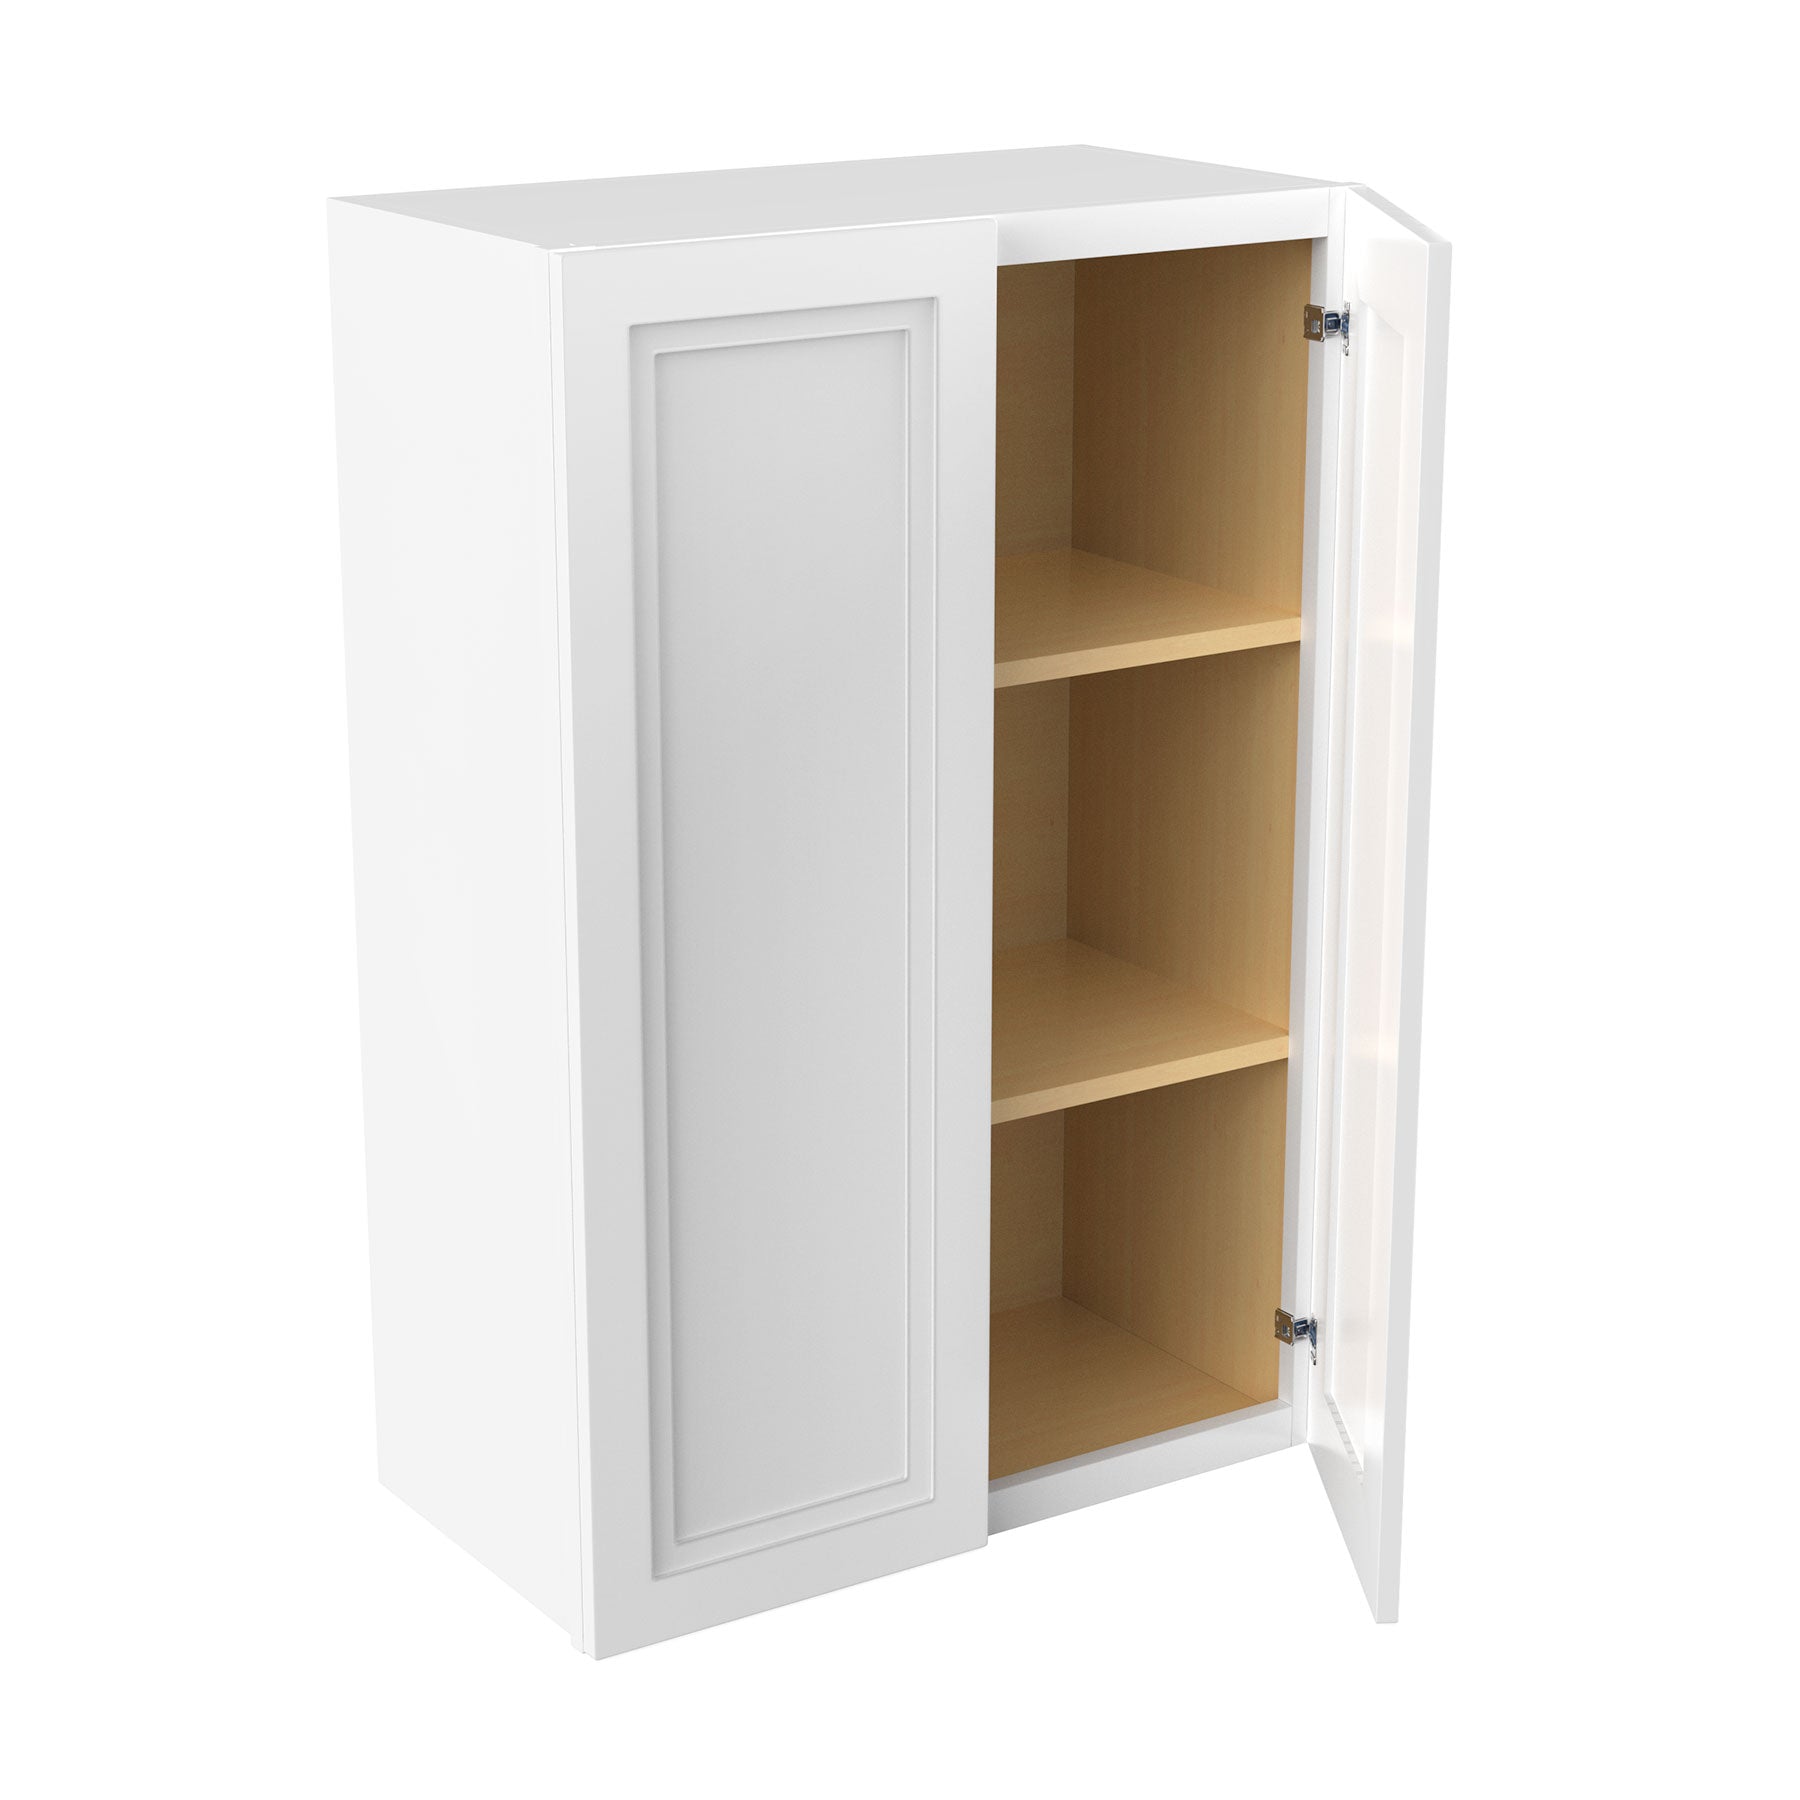 Fashion White - Double Door Wall Cabinet | 24"W x 36"H x 12"D